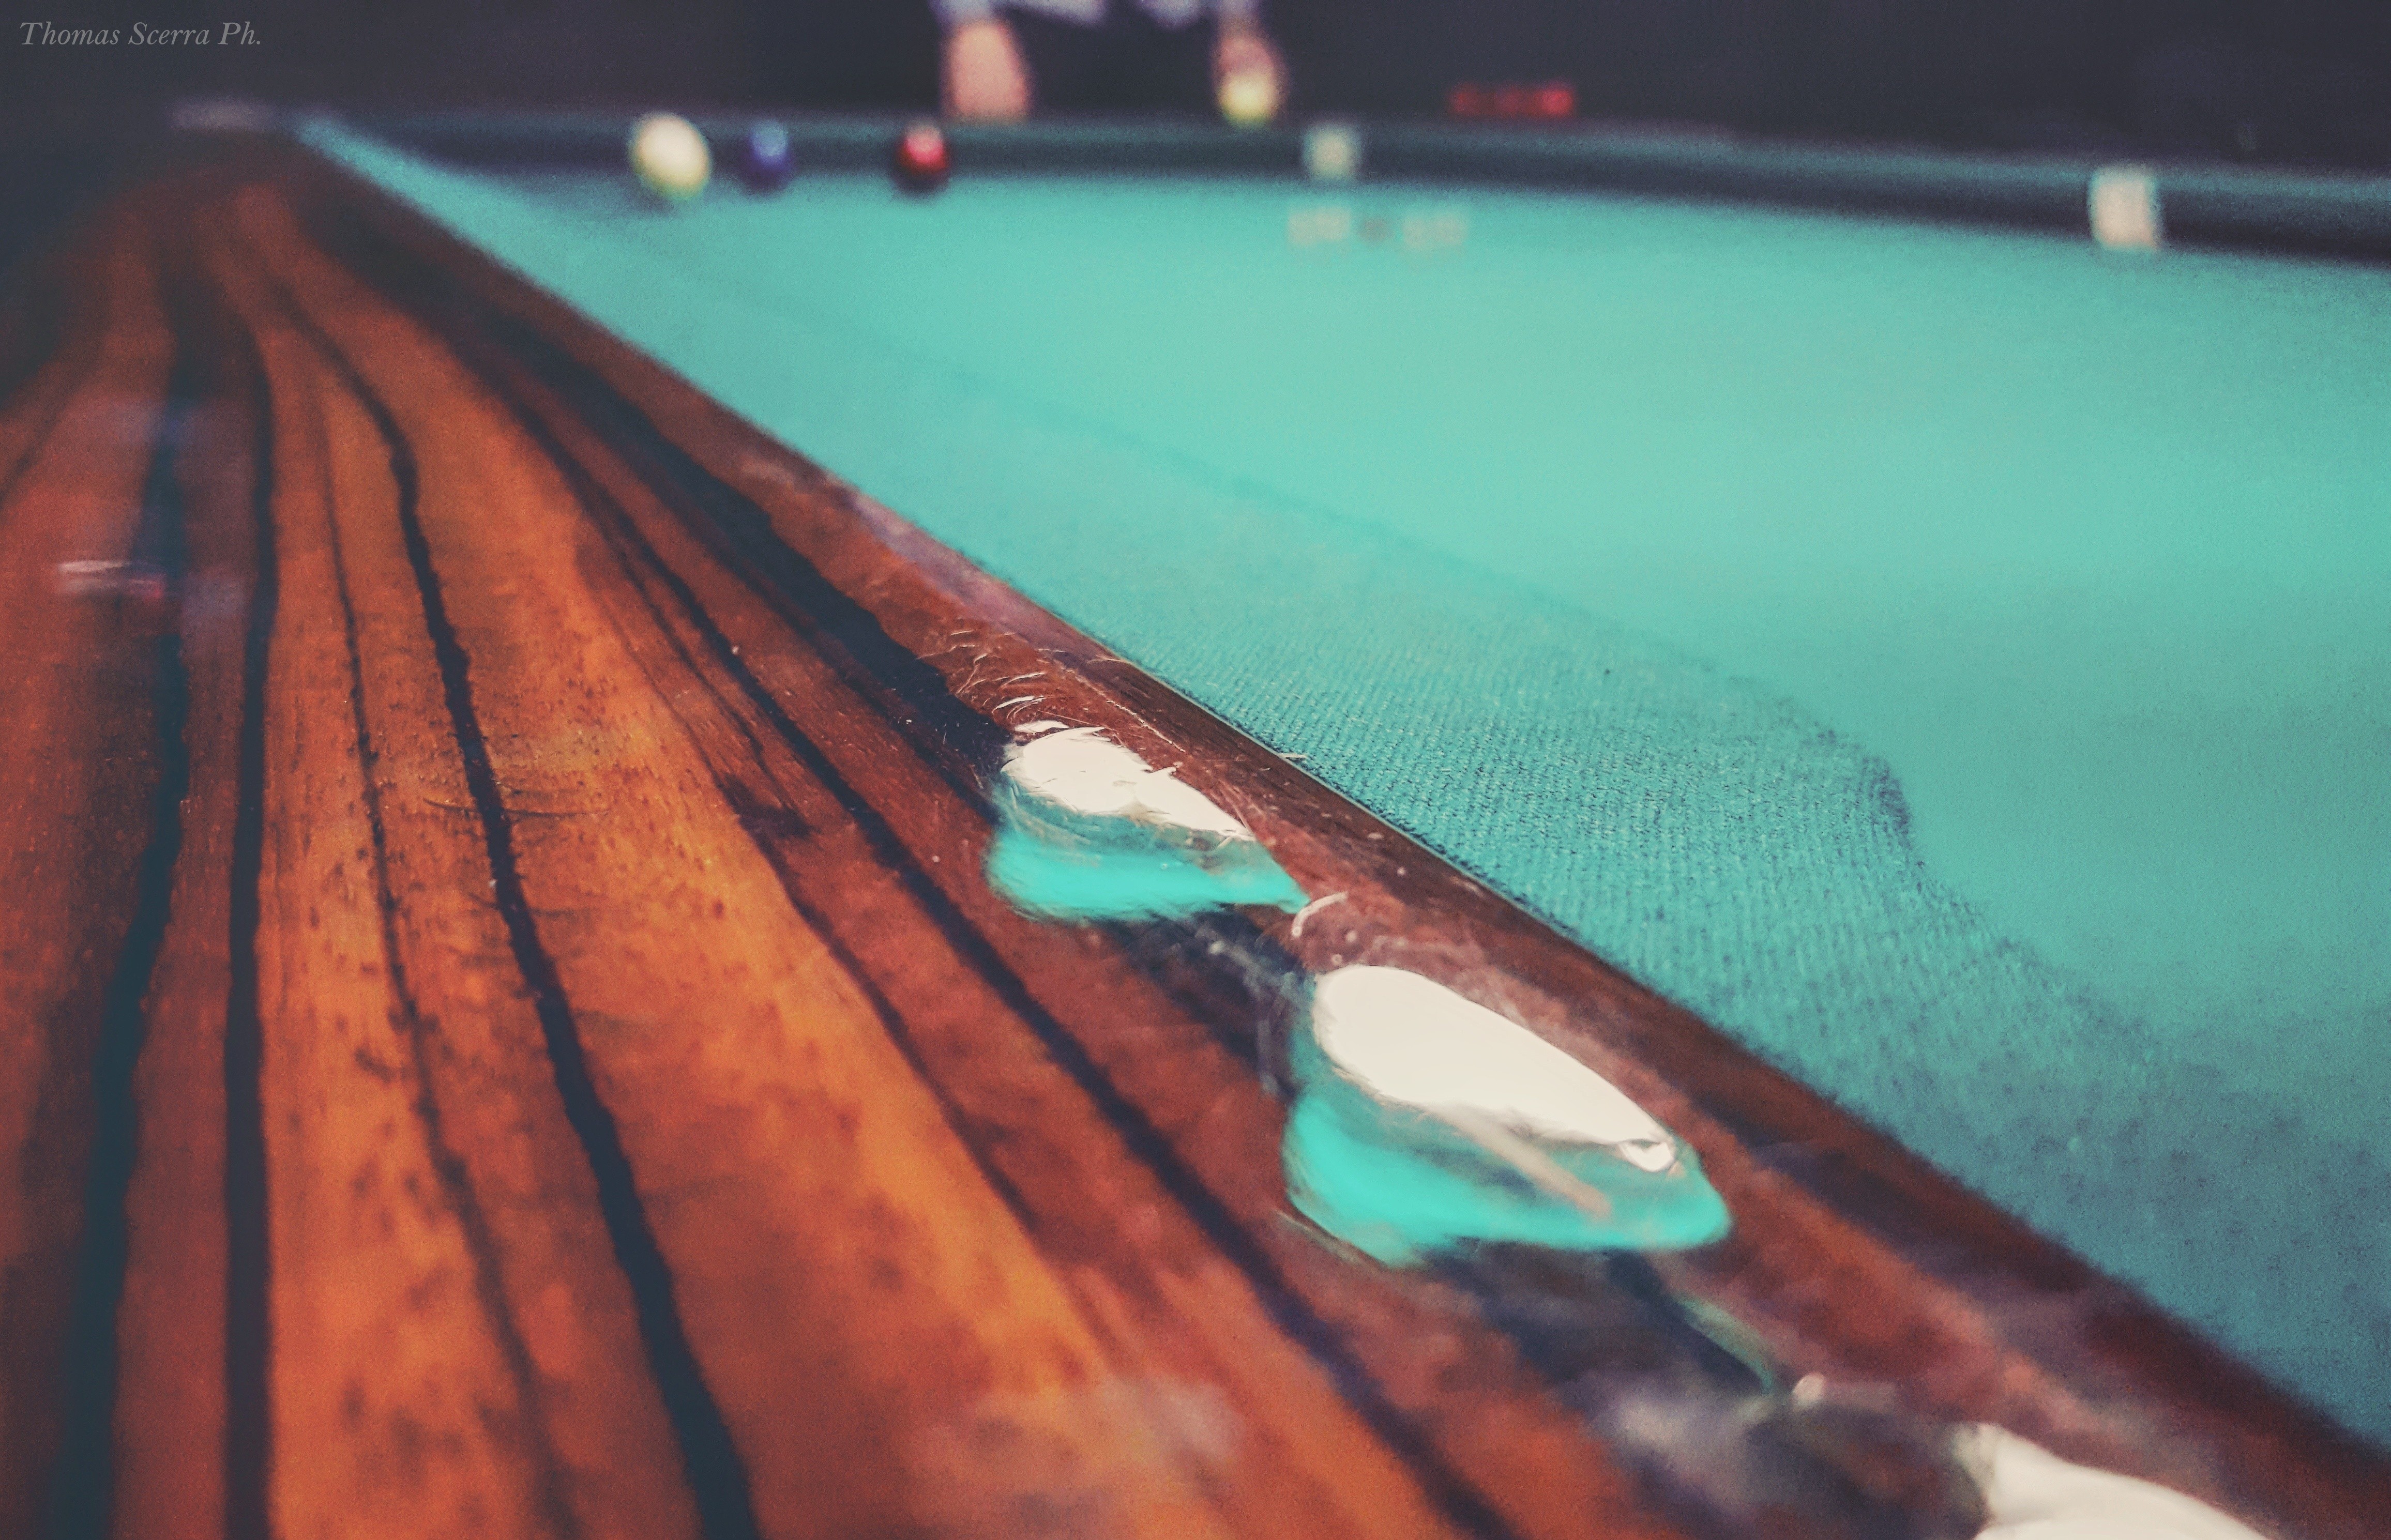 Table Wood Photography Filter Pool Table 4624x2979